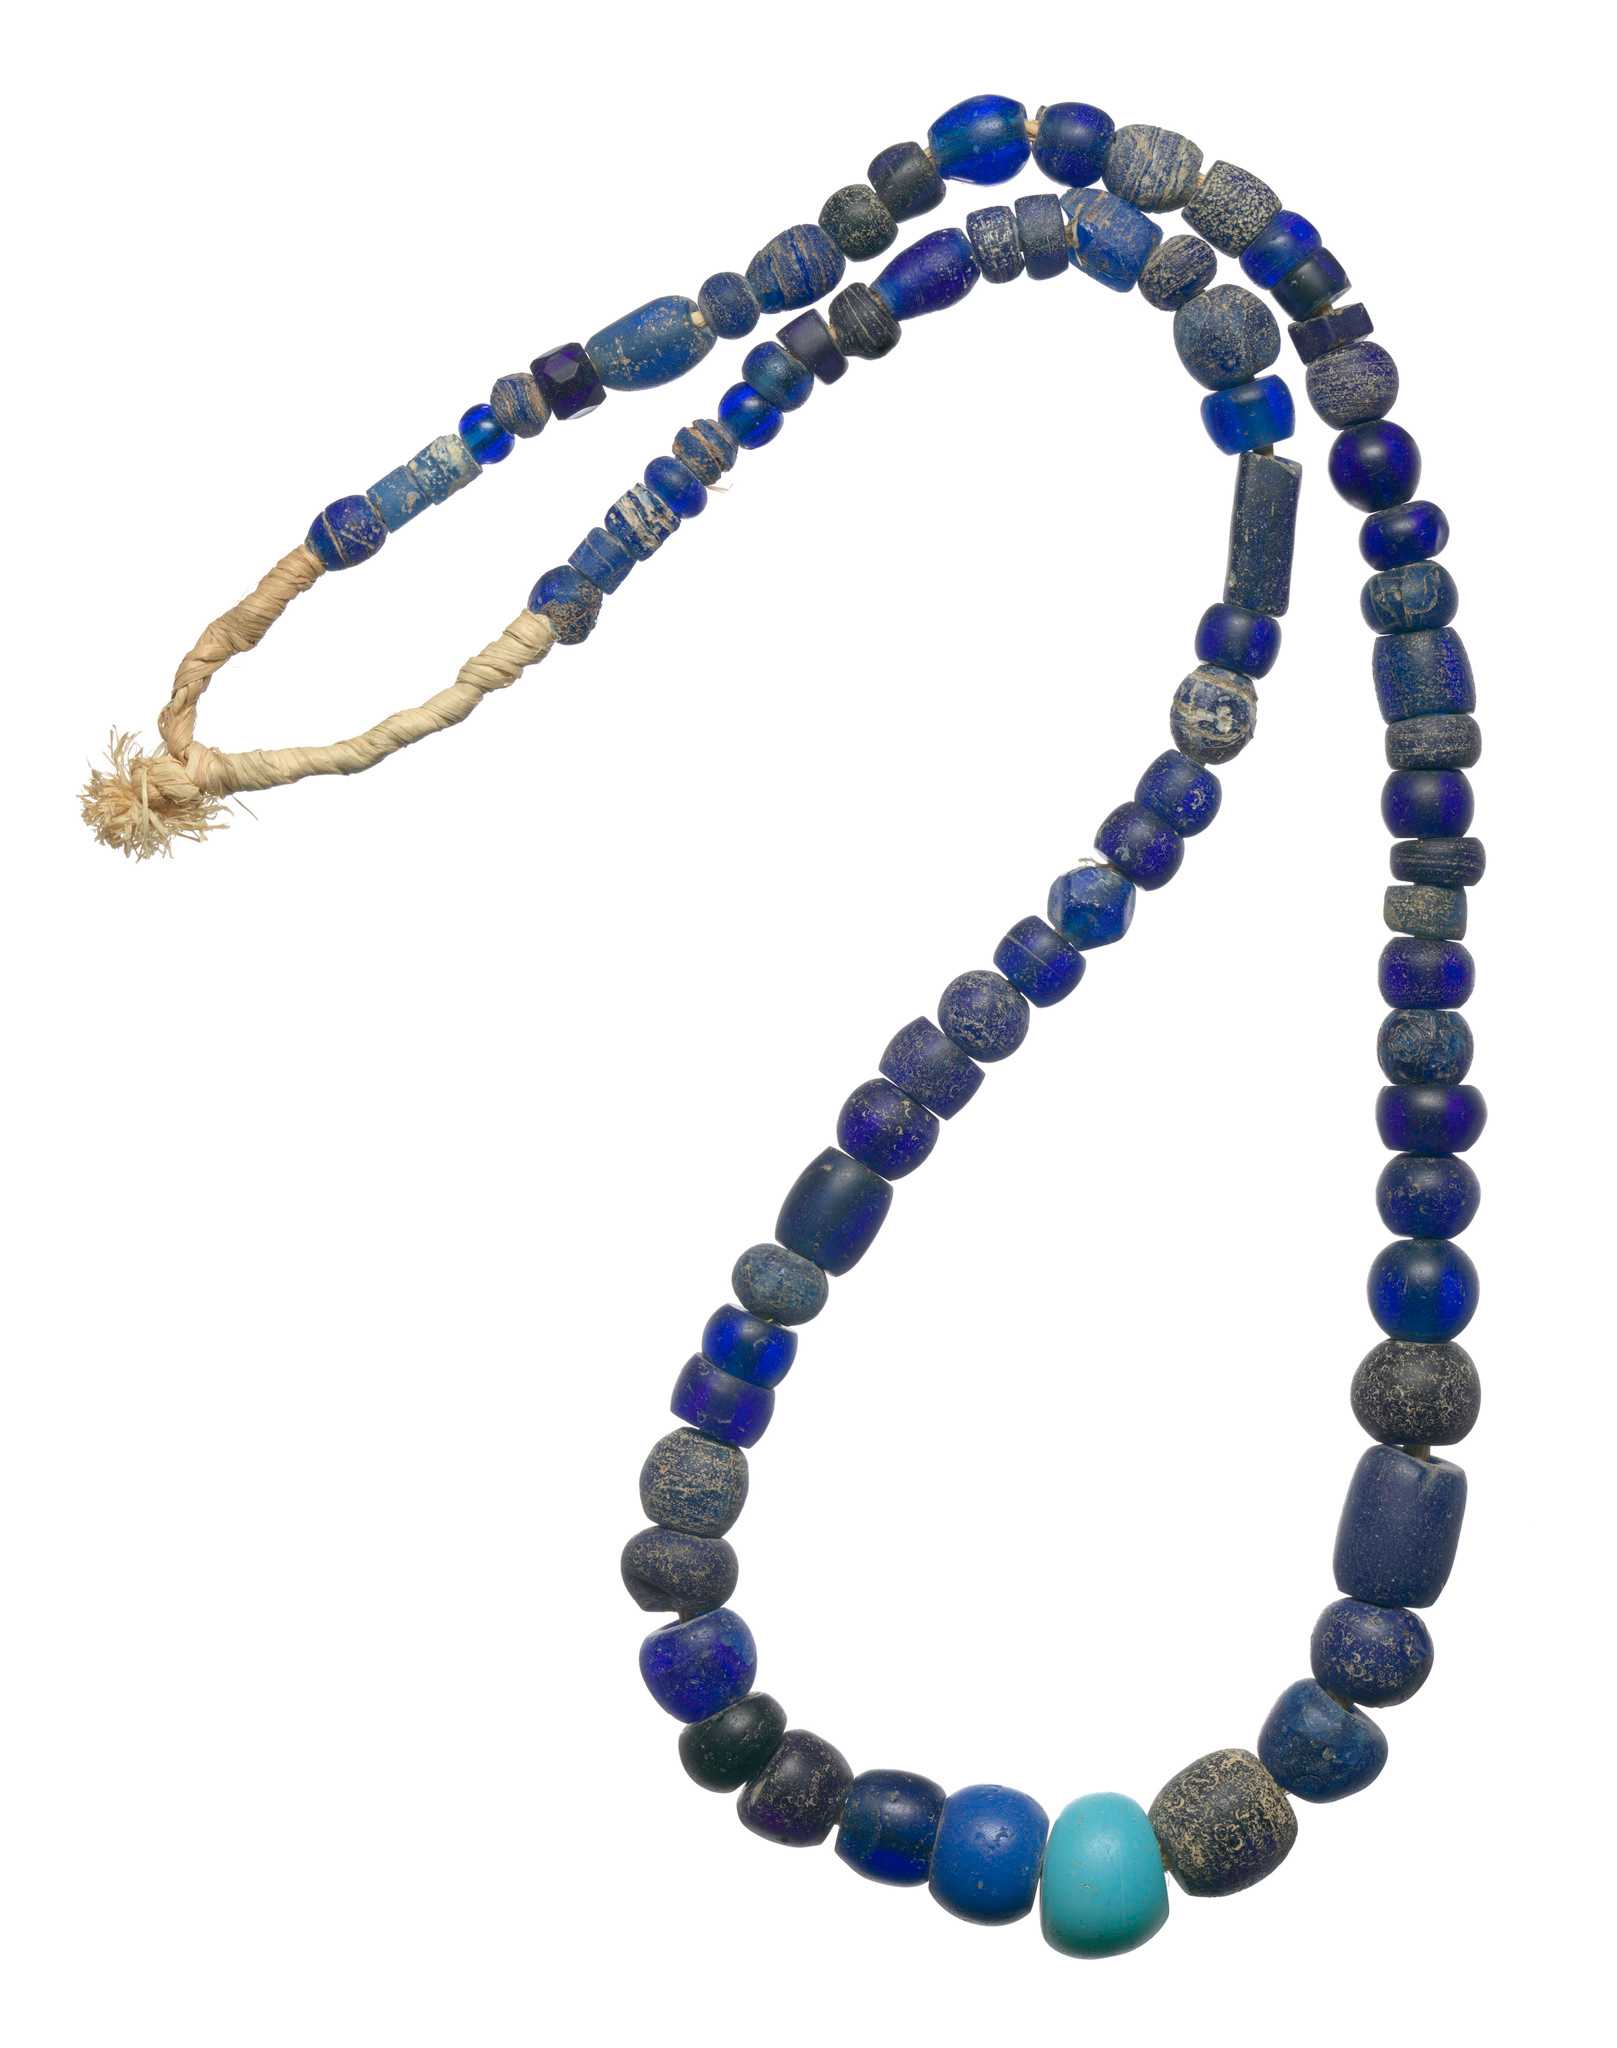 Strand of blue glass beads strung on natural fiber. Beads are of various shades of blue and various shape. Beads are drilled through center and strung on natural fiber string.